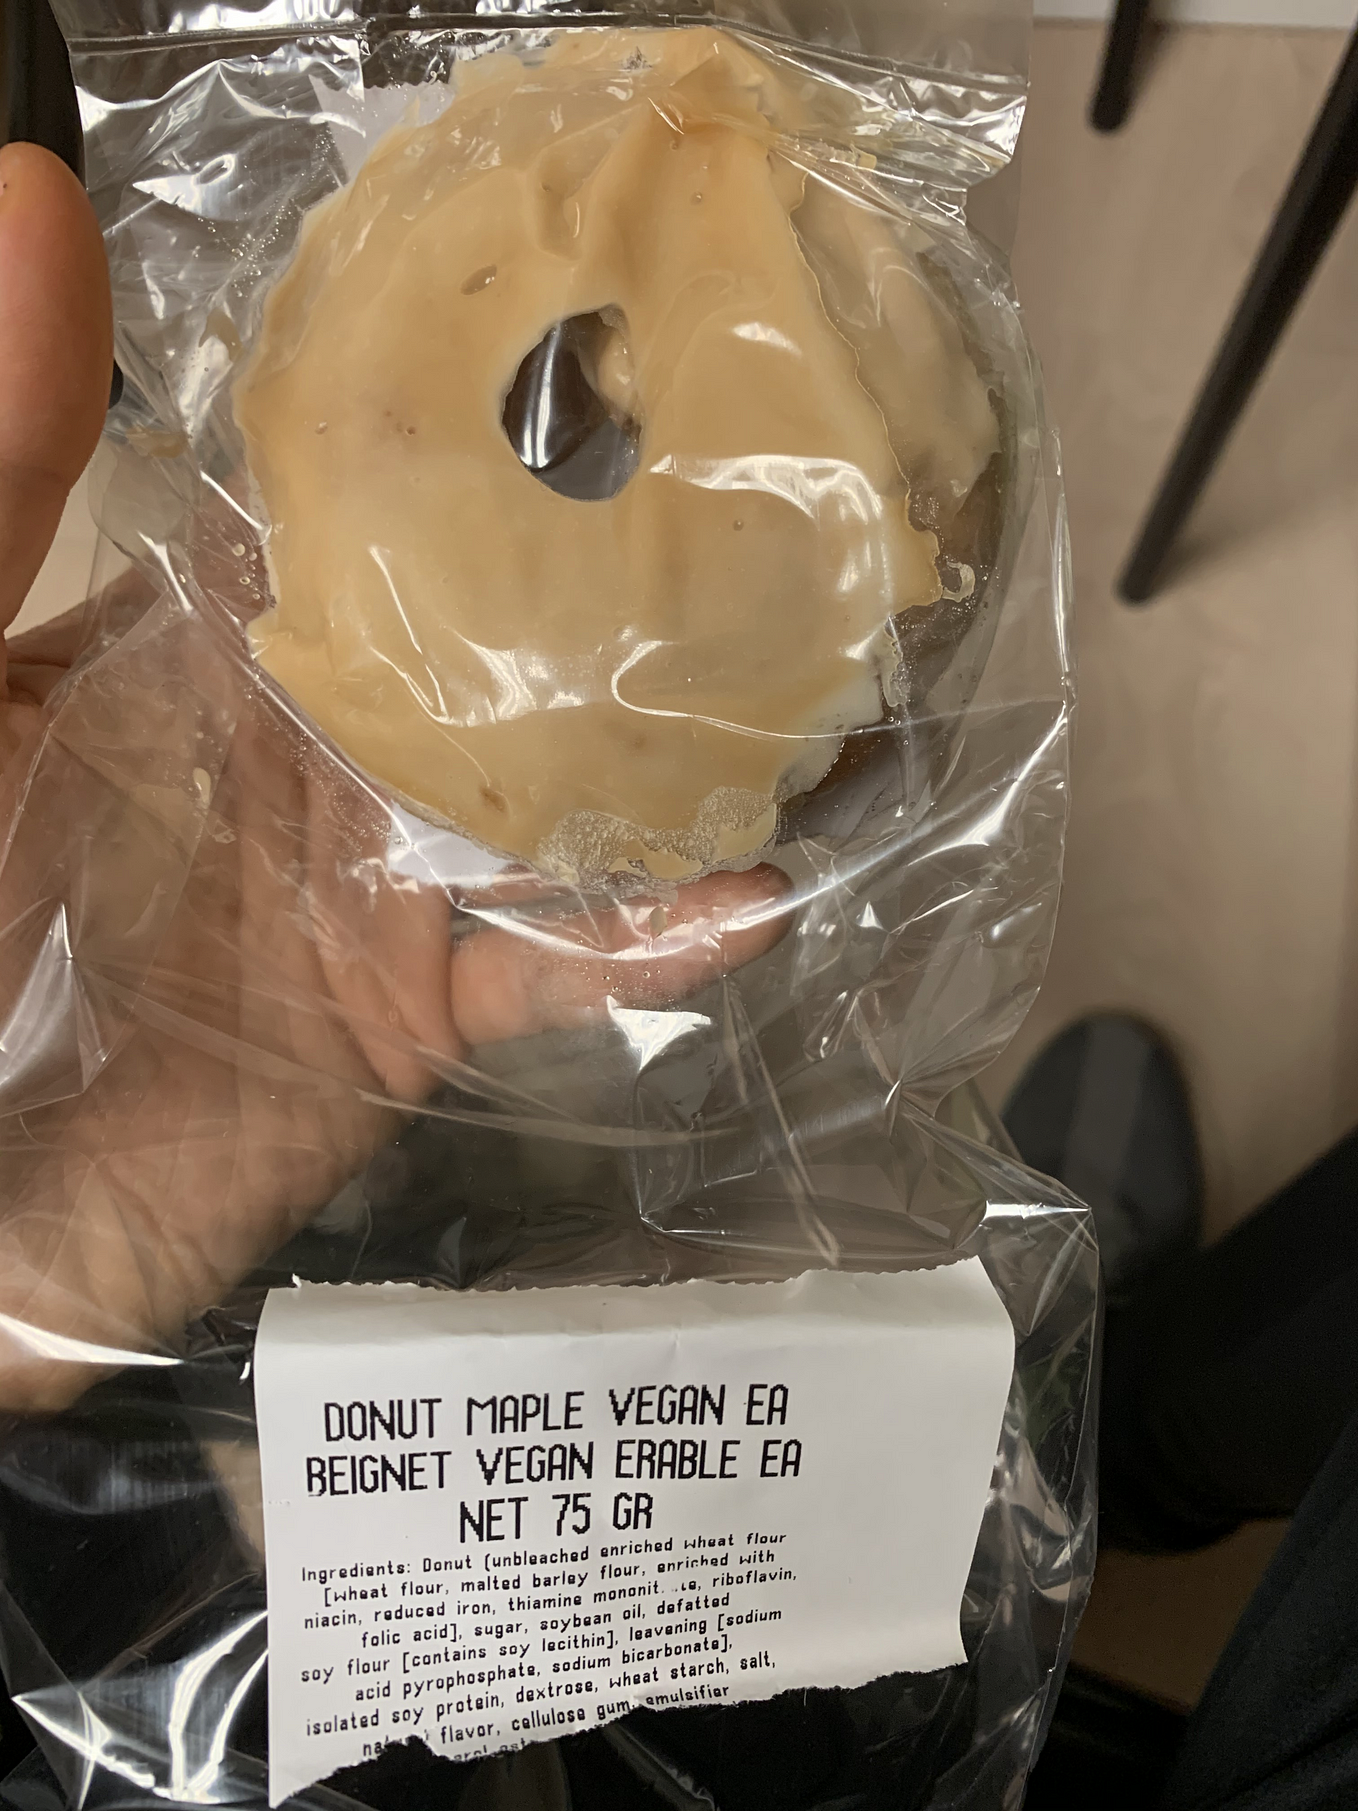 Whole Foods (Vegan)Maple Donut Review